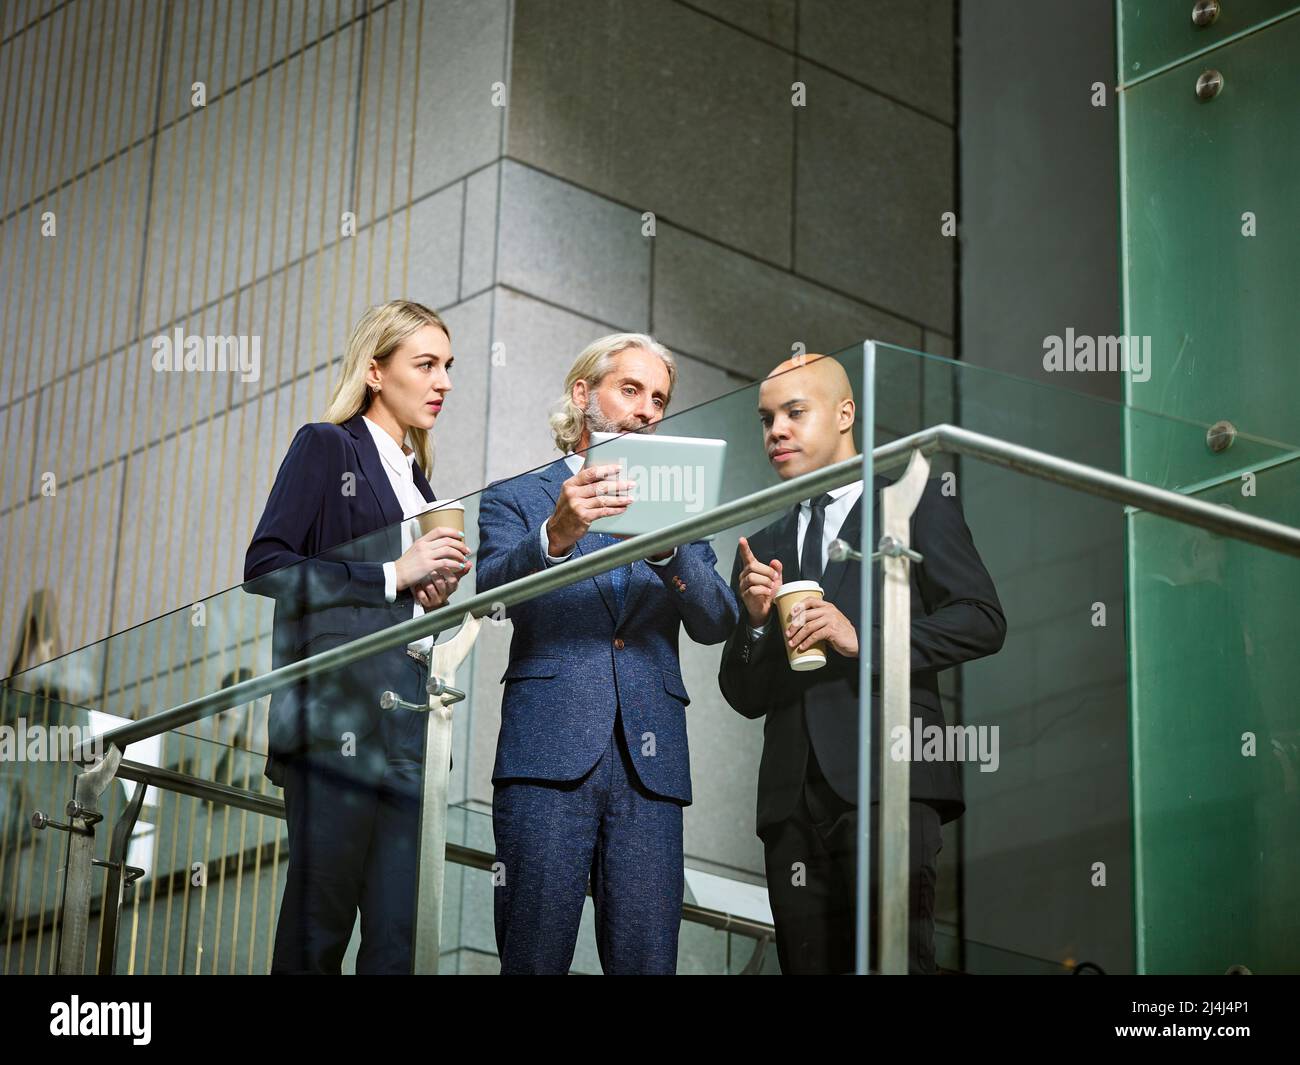 multinational and multiethnic corporate people discussing business using digital tablet in modern office building, low angle view. Stock Photo